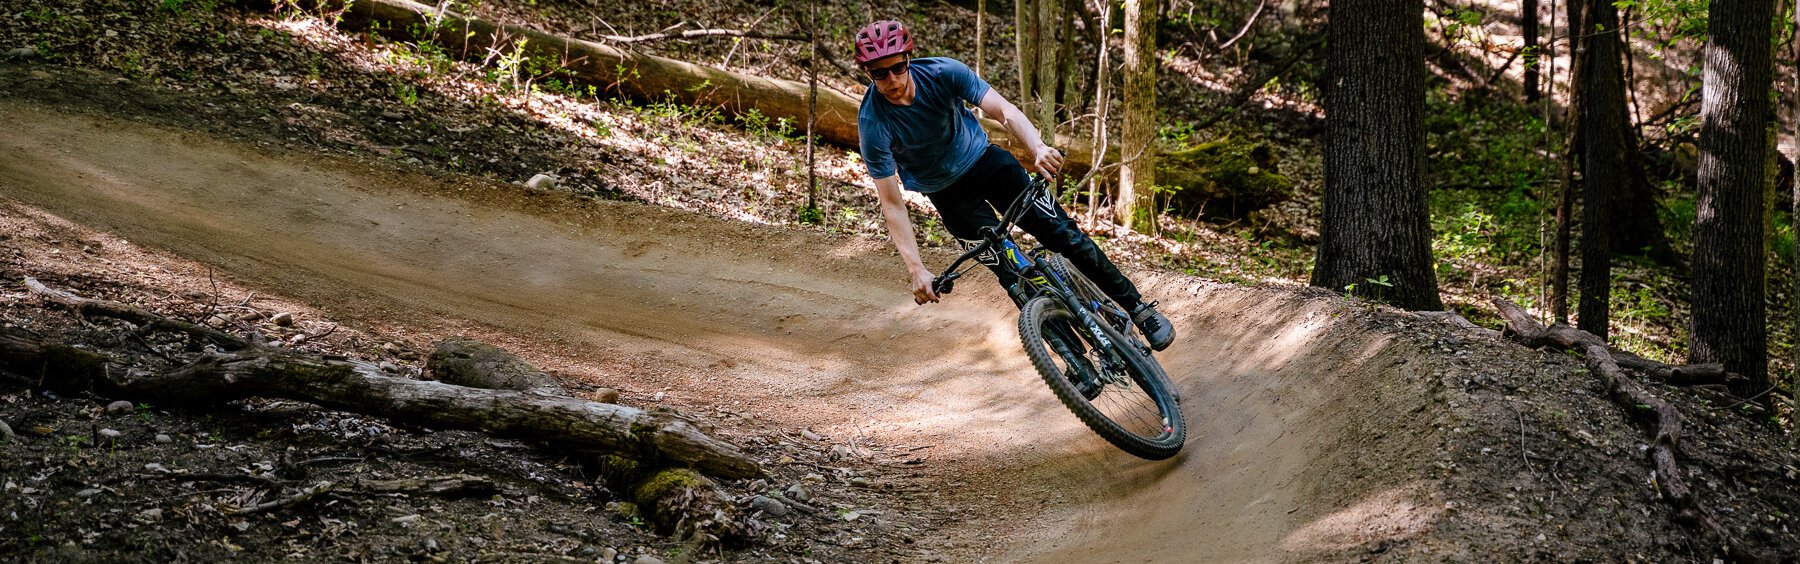 Rivers Whitson rides the Shelden Trails at Stony Creek Metropark.